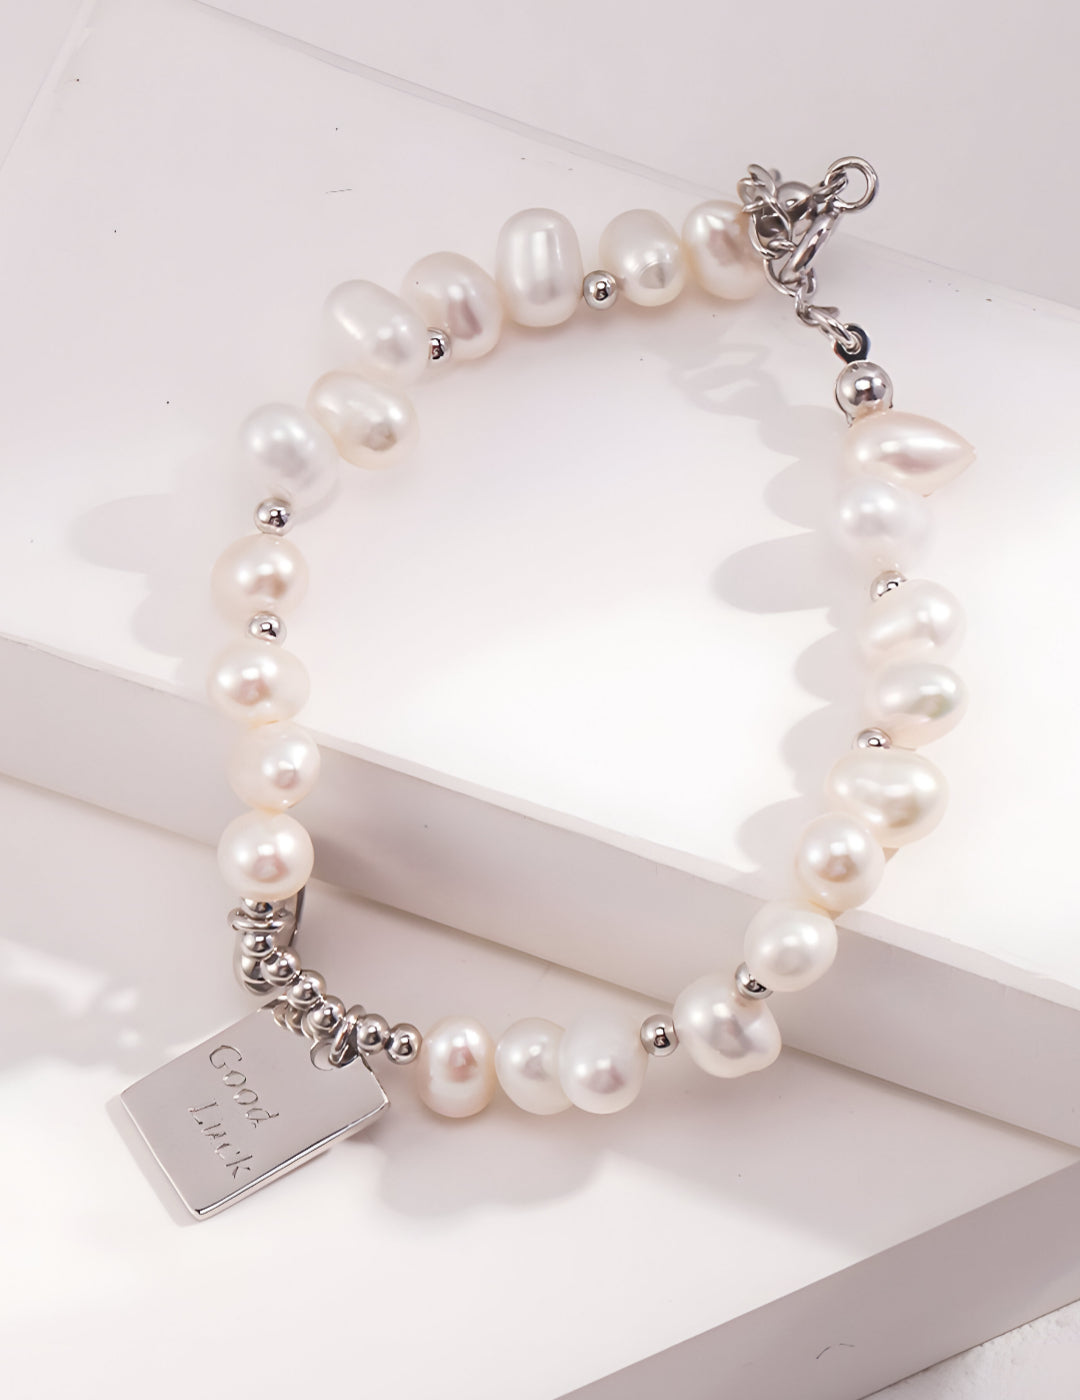 Pearl Bracelet for good fortune - S925 Sterling Silver with18K Gold Vermeil  - Pearl Luminance - Embrace luck on your wrist with intricately designed charms that make everyday magical